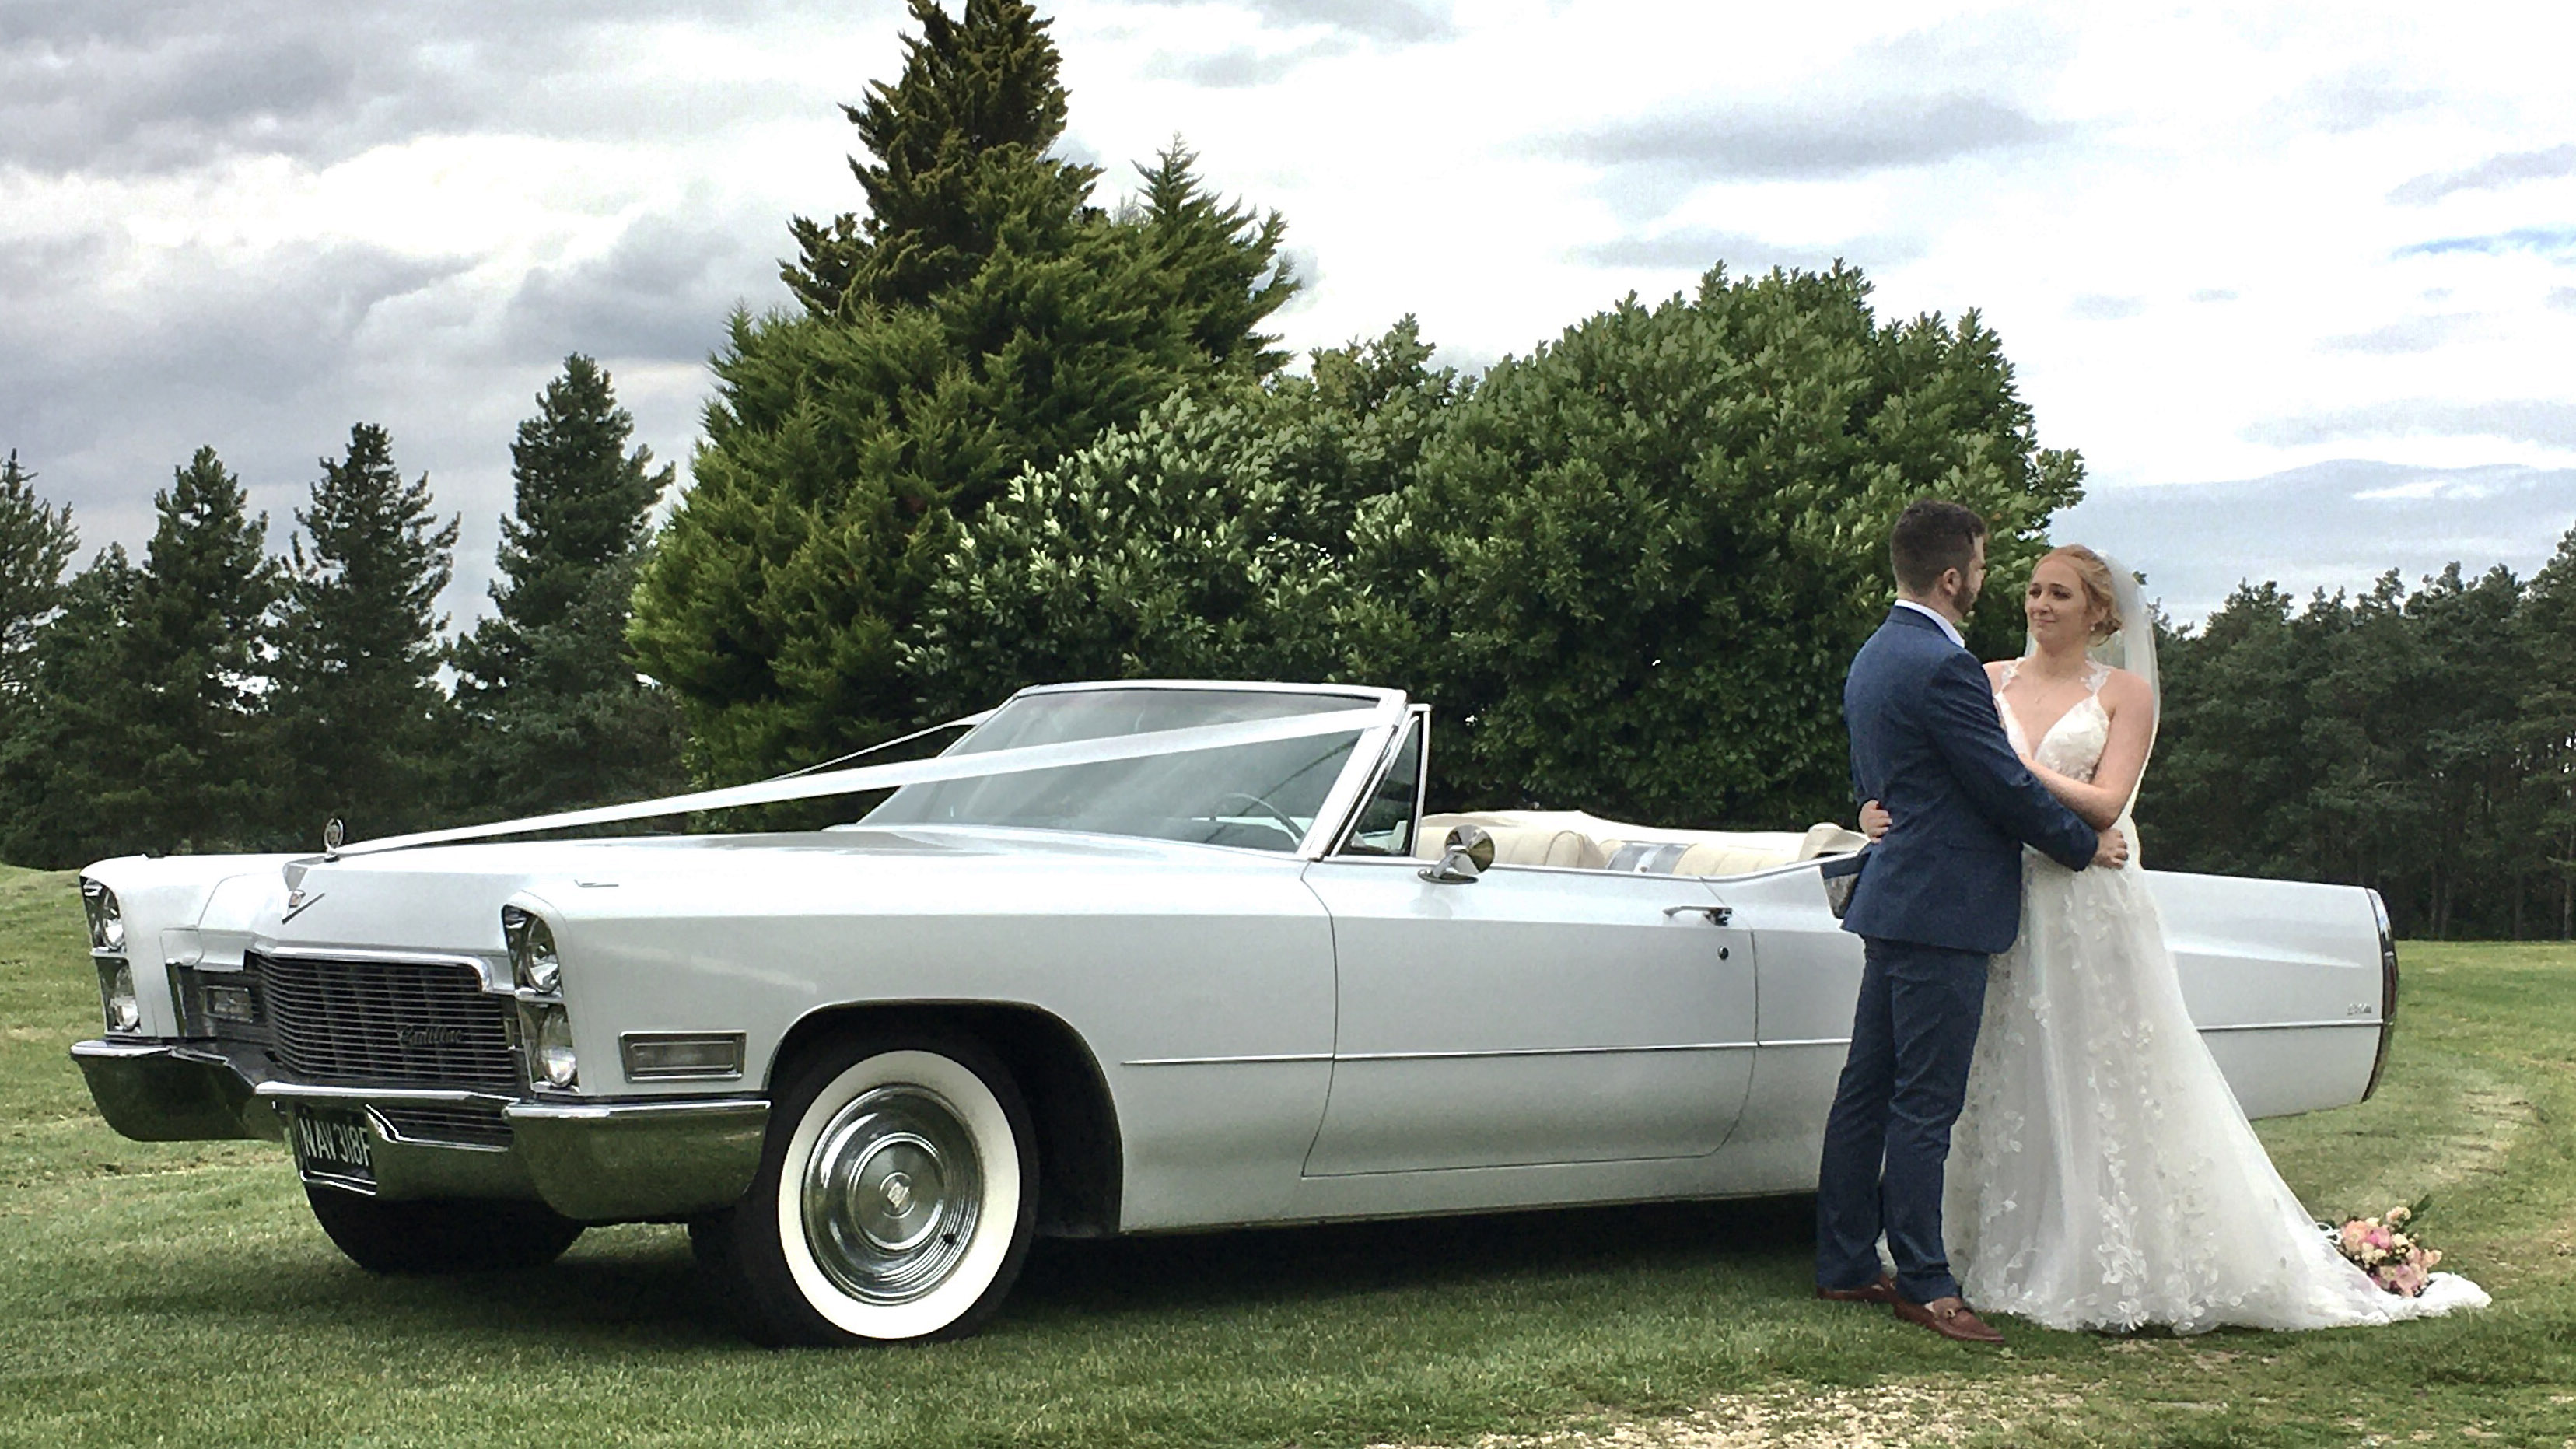 White American Classic Cadillac in white with roof down, decorated with white ribbons. Bride and Groom re standing by the vehicle holding and looking at each others.